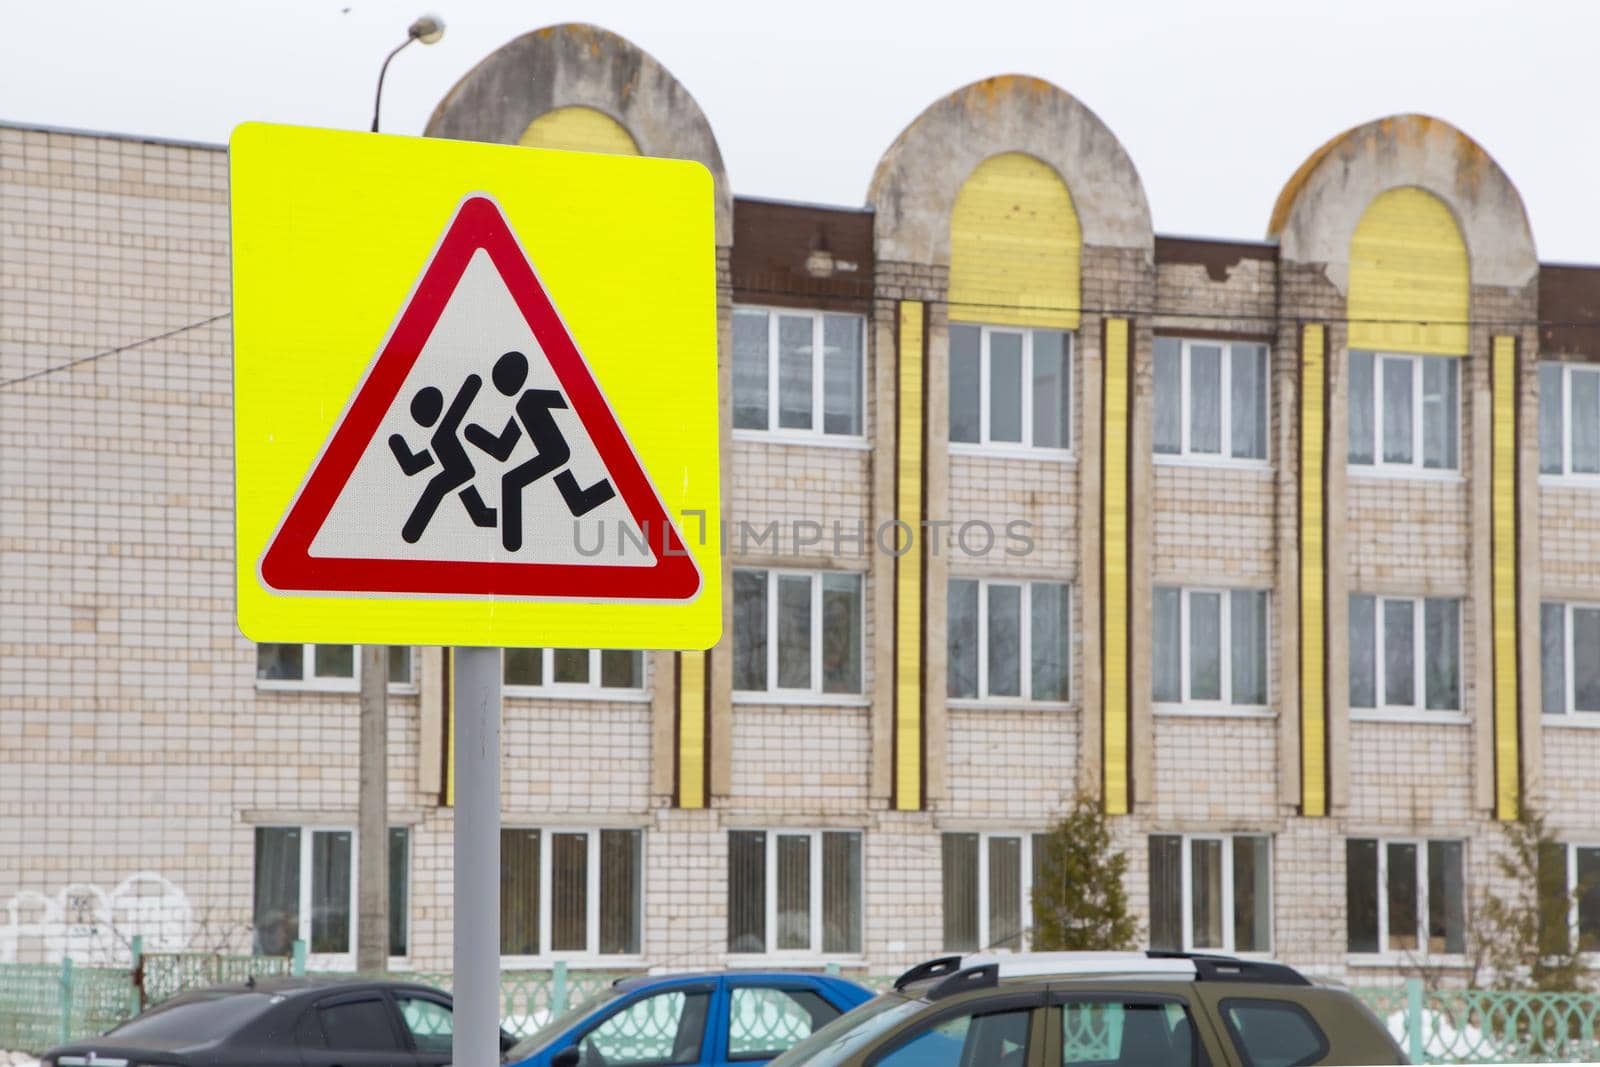 Road sign means be careful children. Against the background of the school building and cars standing nearby. Humans run on a white background in a red triangle and a yellow square. Warning sign.